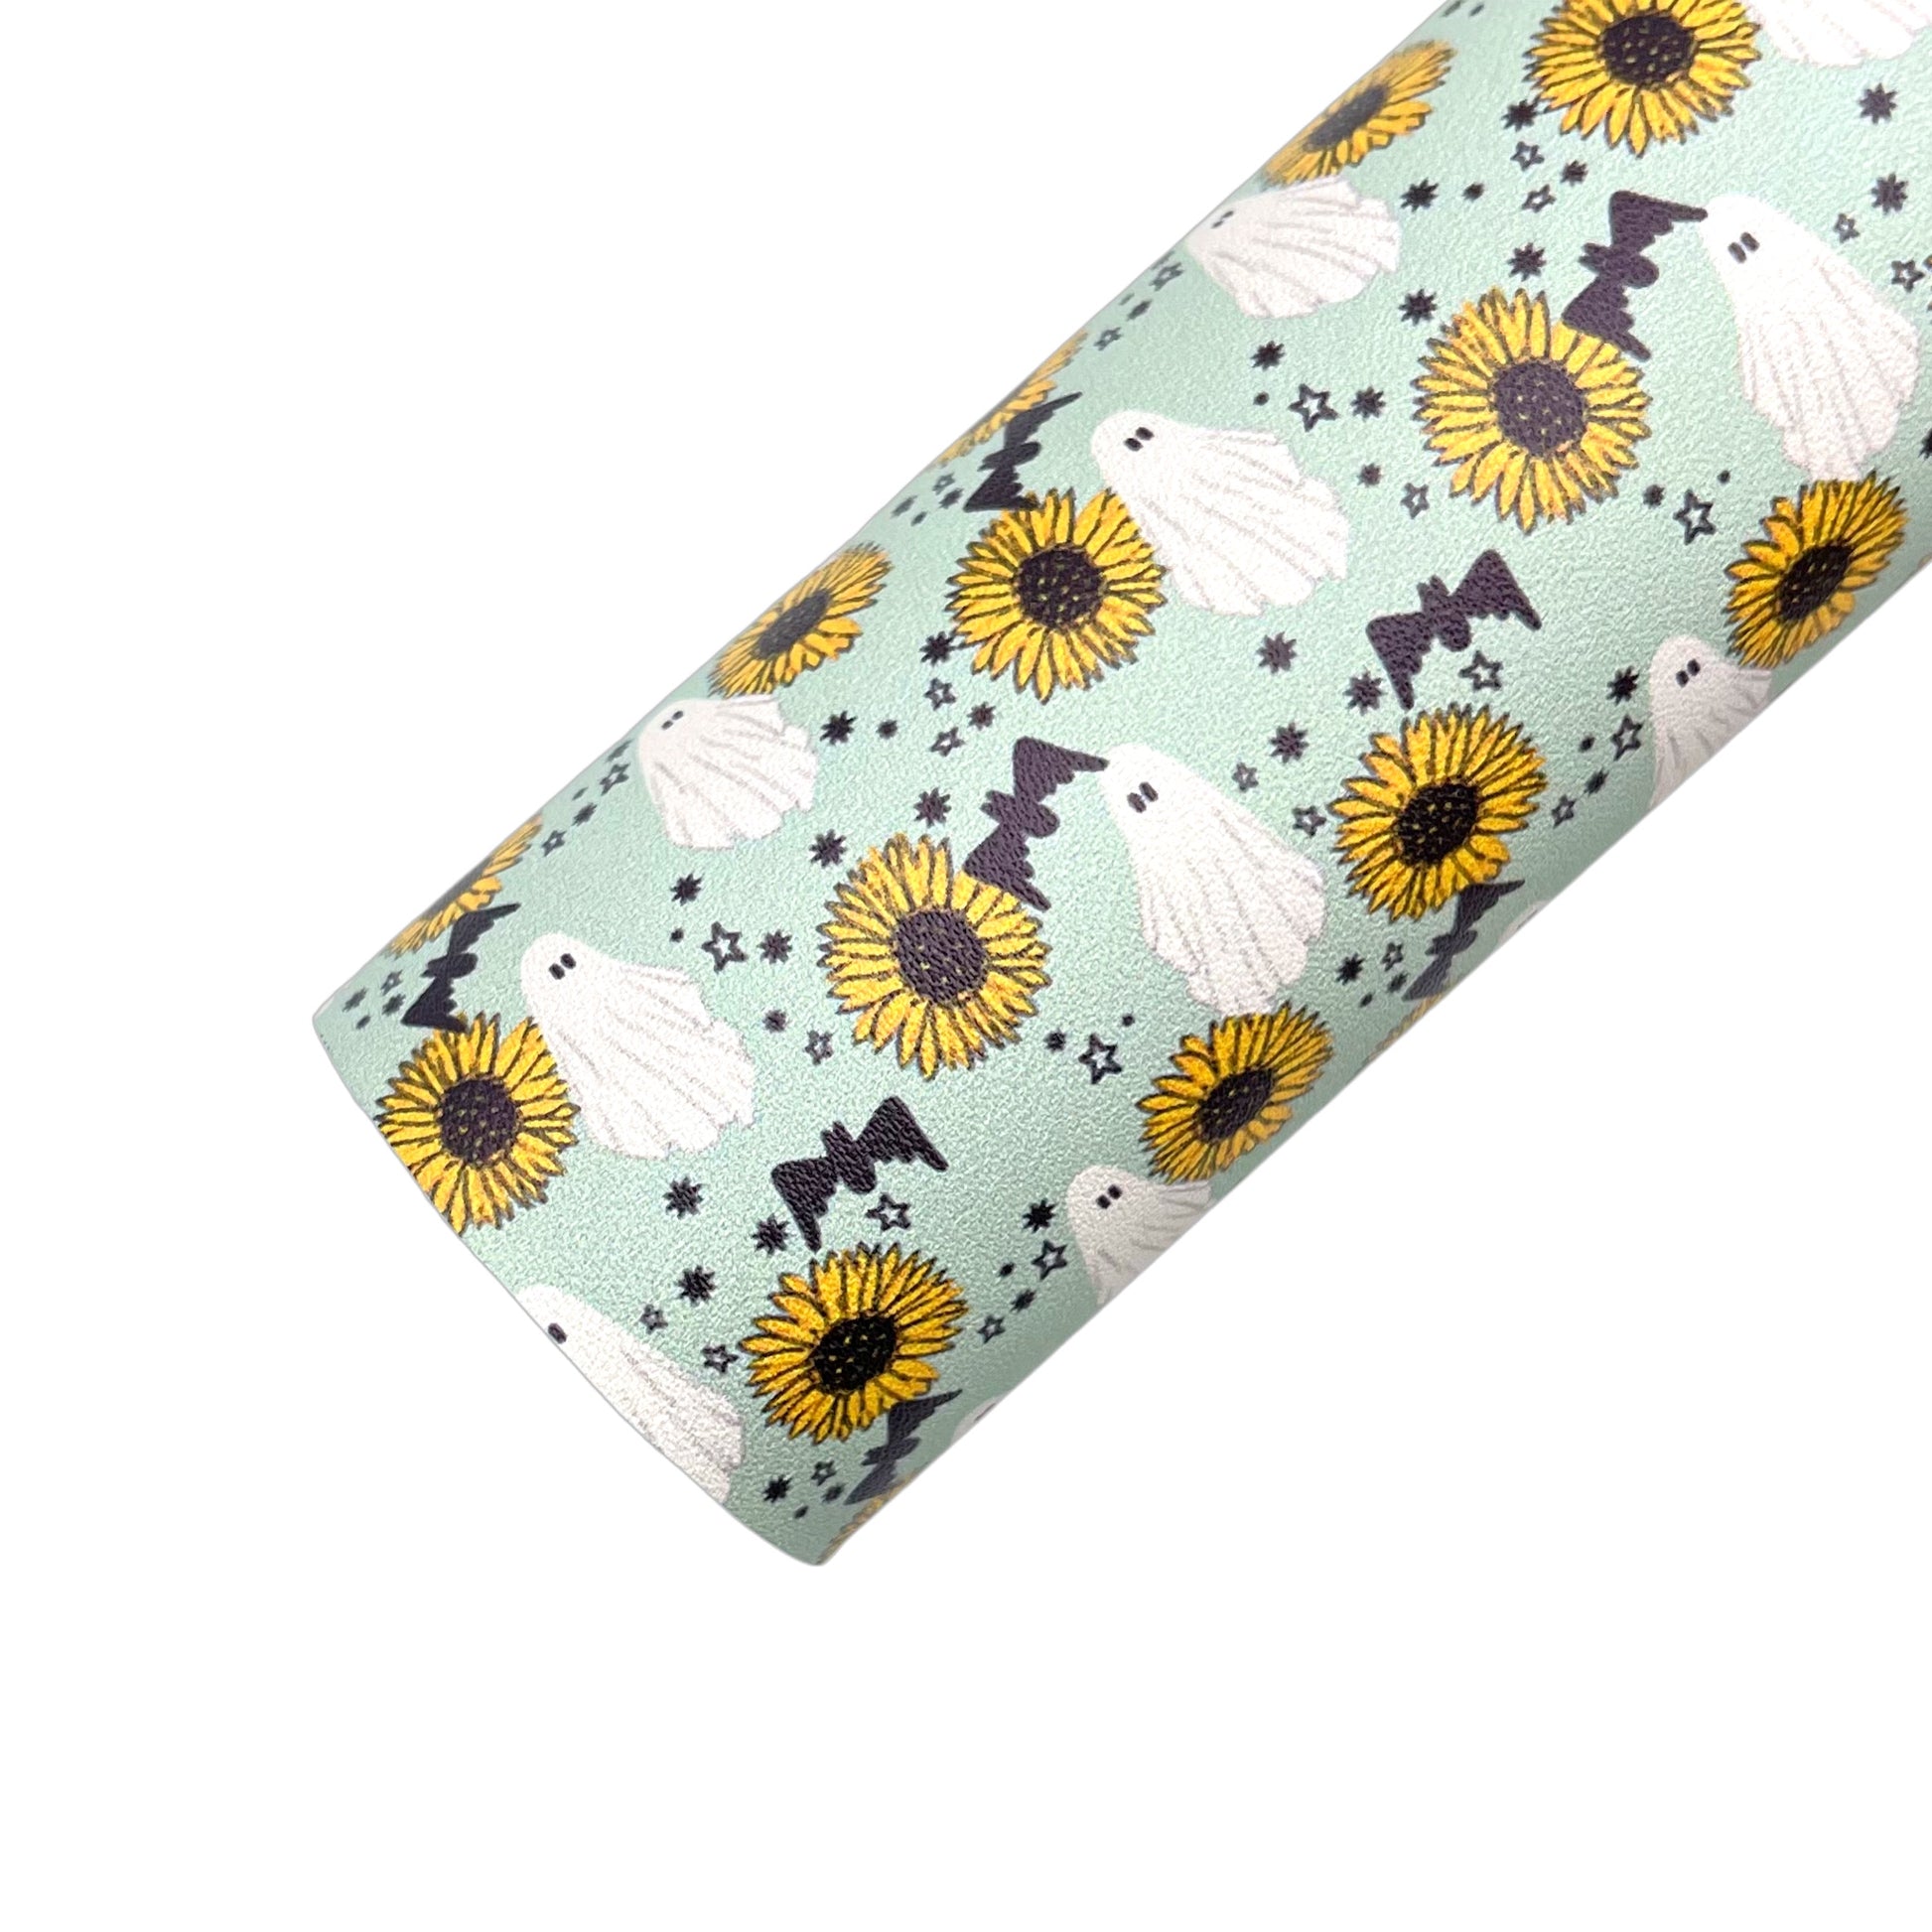 Sunflower and ghost pattern with pale green background faux leather sheet.